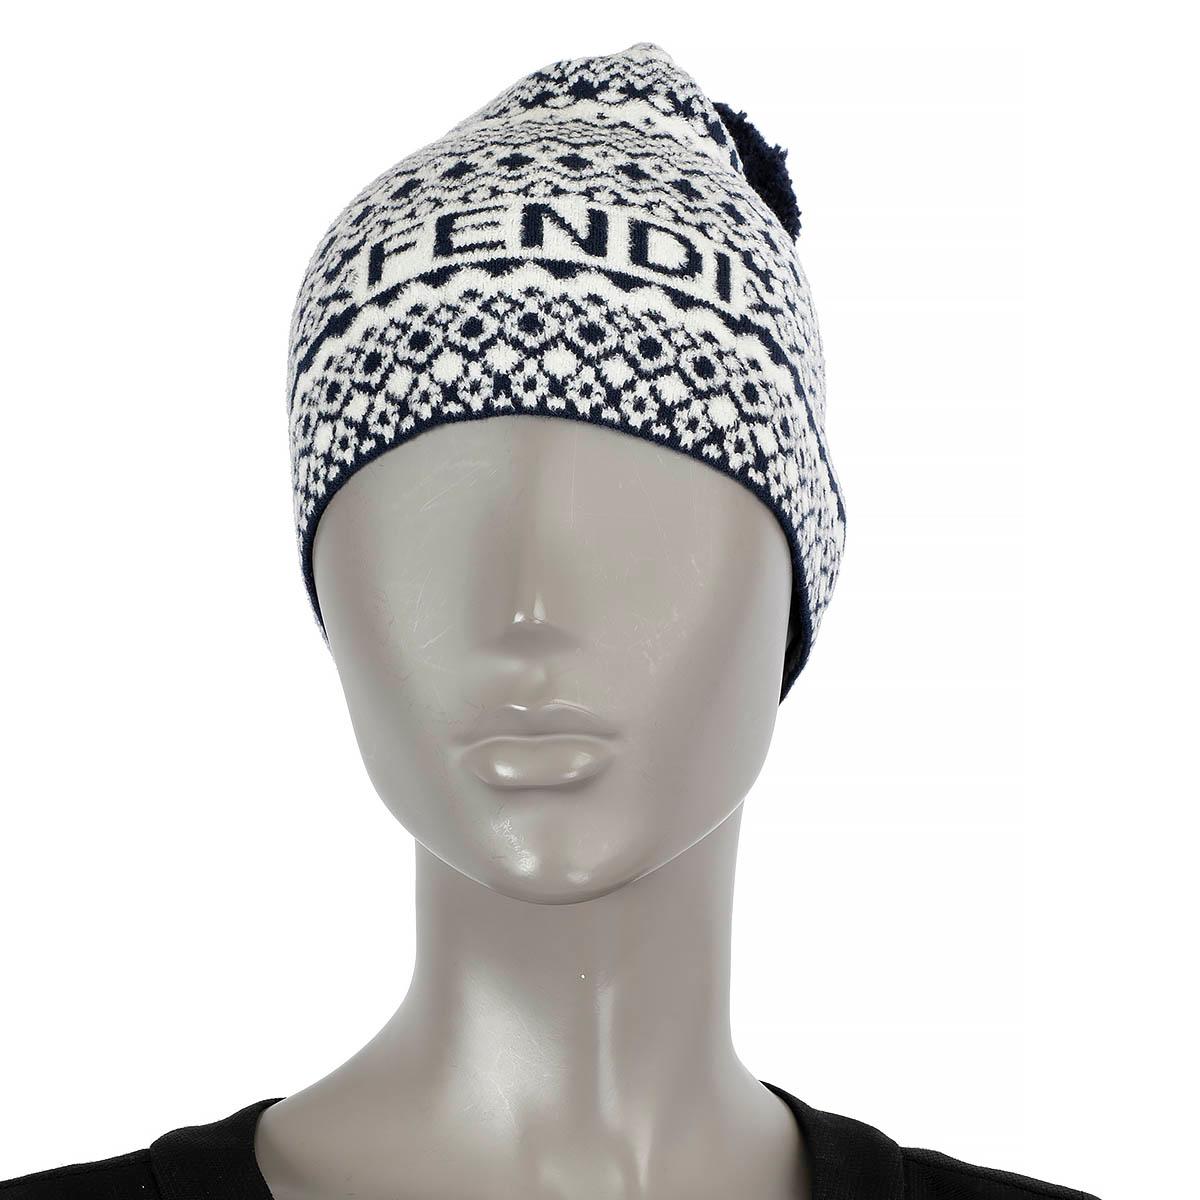 100% authentic Fendi Heritage beanie hat in navy blue and white wool (40%), viscose (31%), polyamide (28%) and elastane (1%). Decorated with geometric pattern, pompom and logo. Has been worn and is in excellent condition.